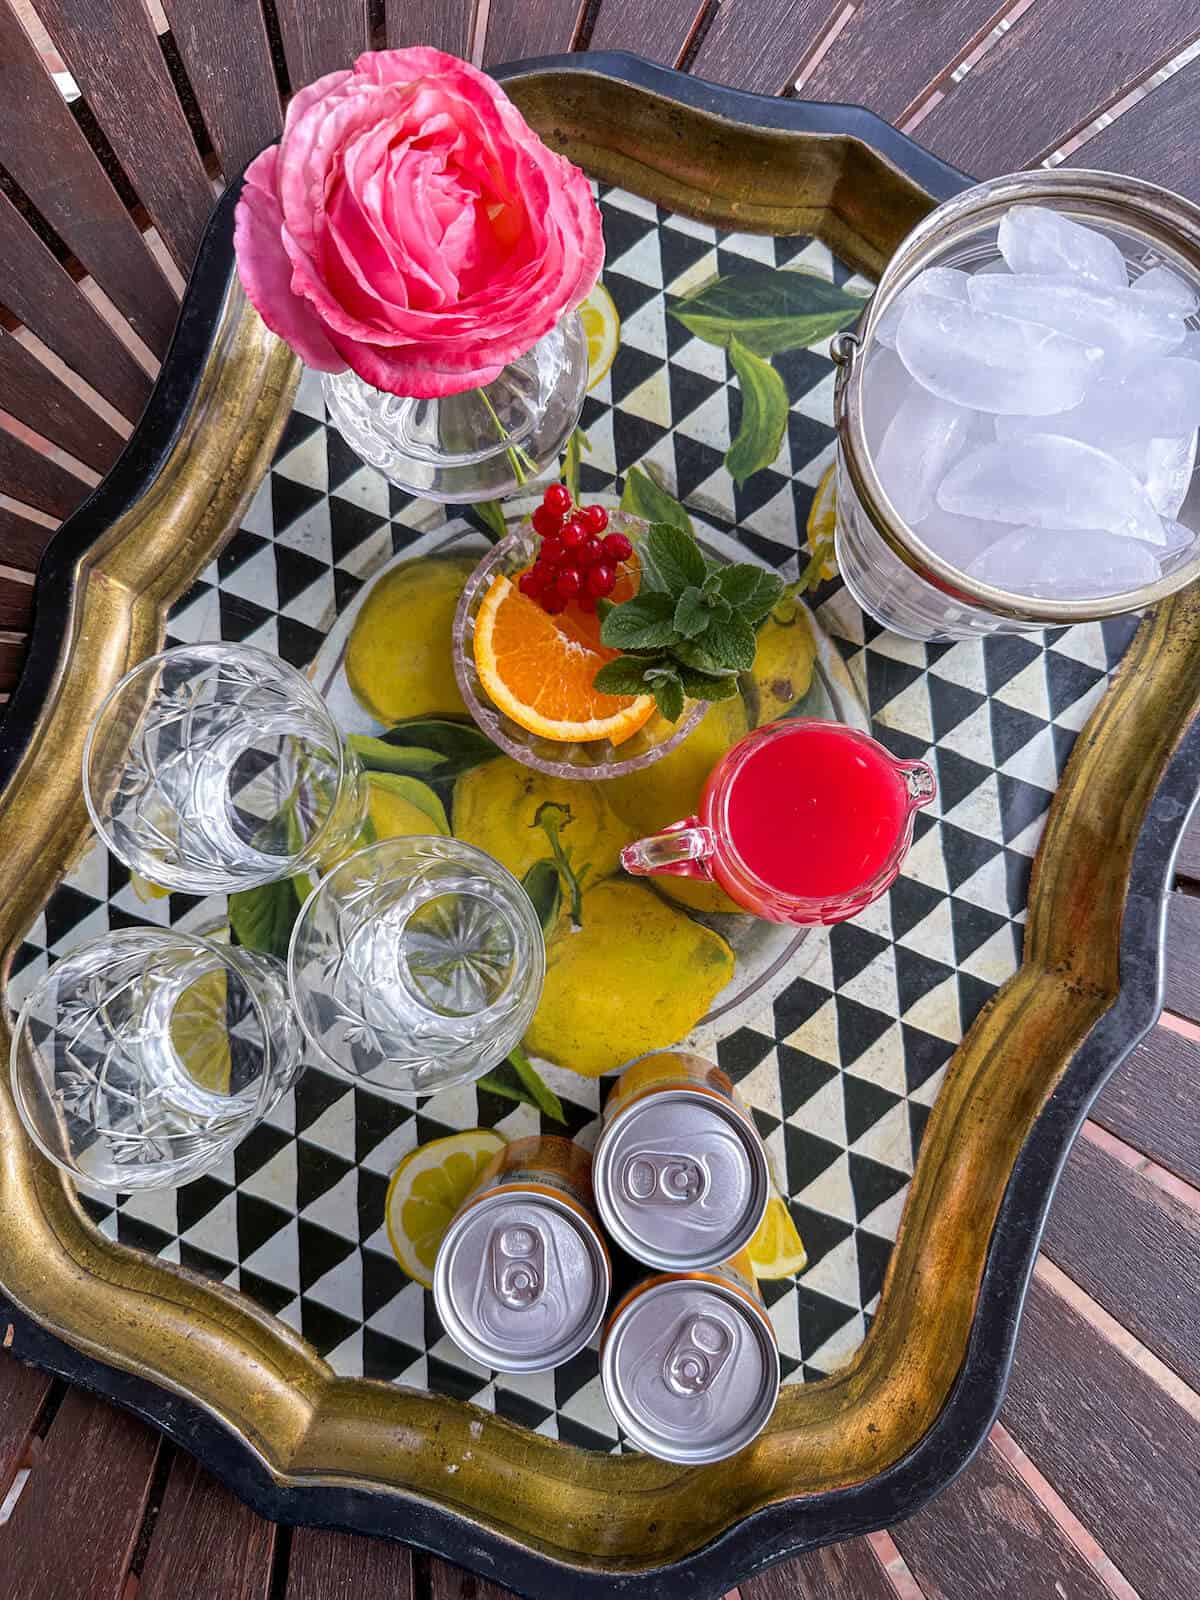 A tray of glasses, red currant cordial, ice, fruit garnish and cans of ginger ale ready to be served. 